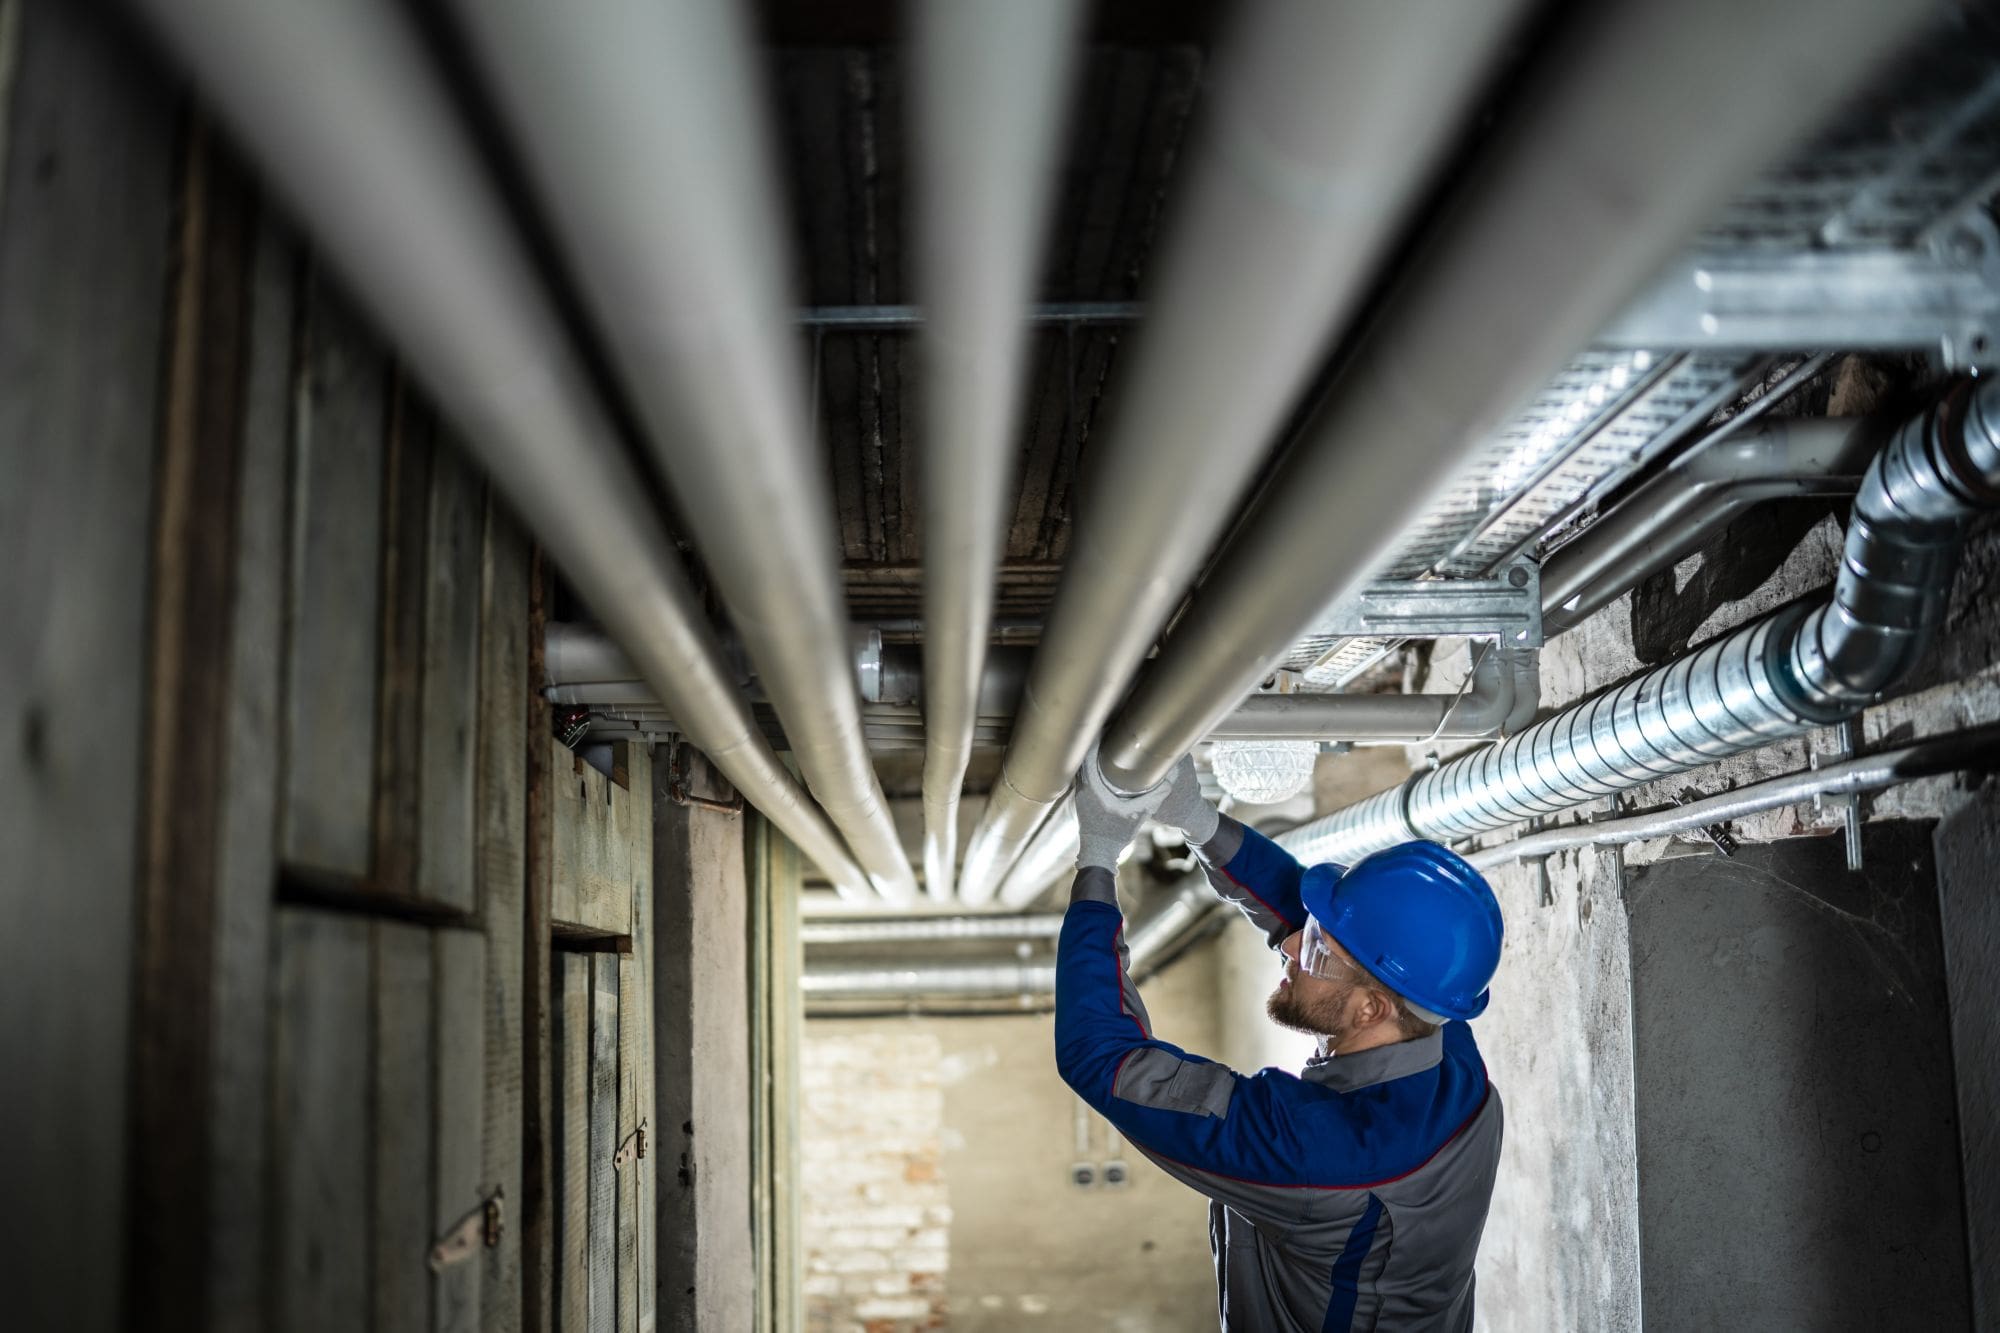 Worker inspecting plumbing pipes under a building